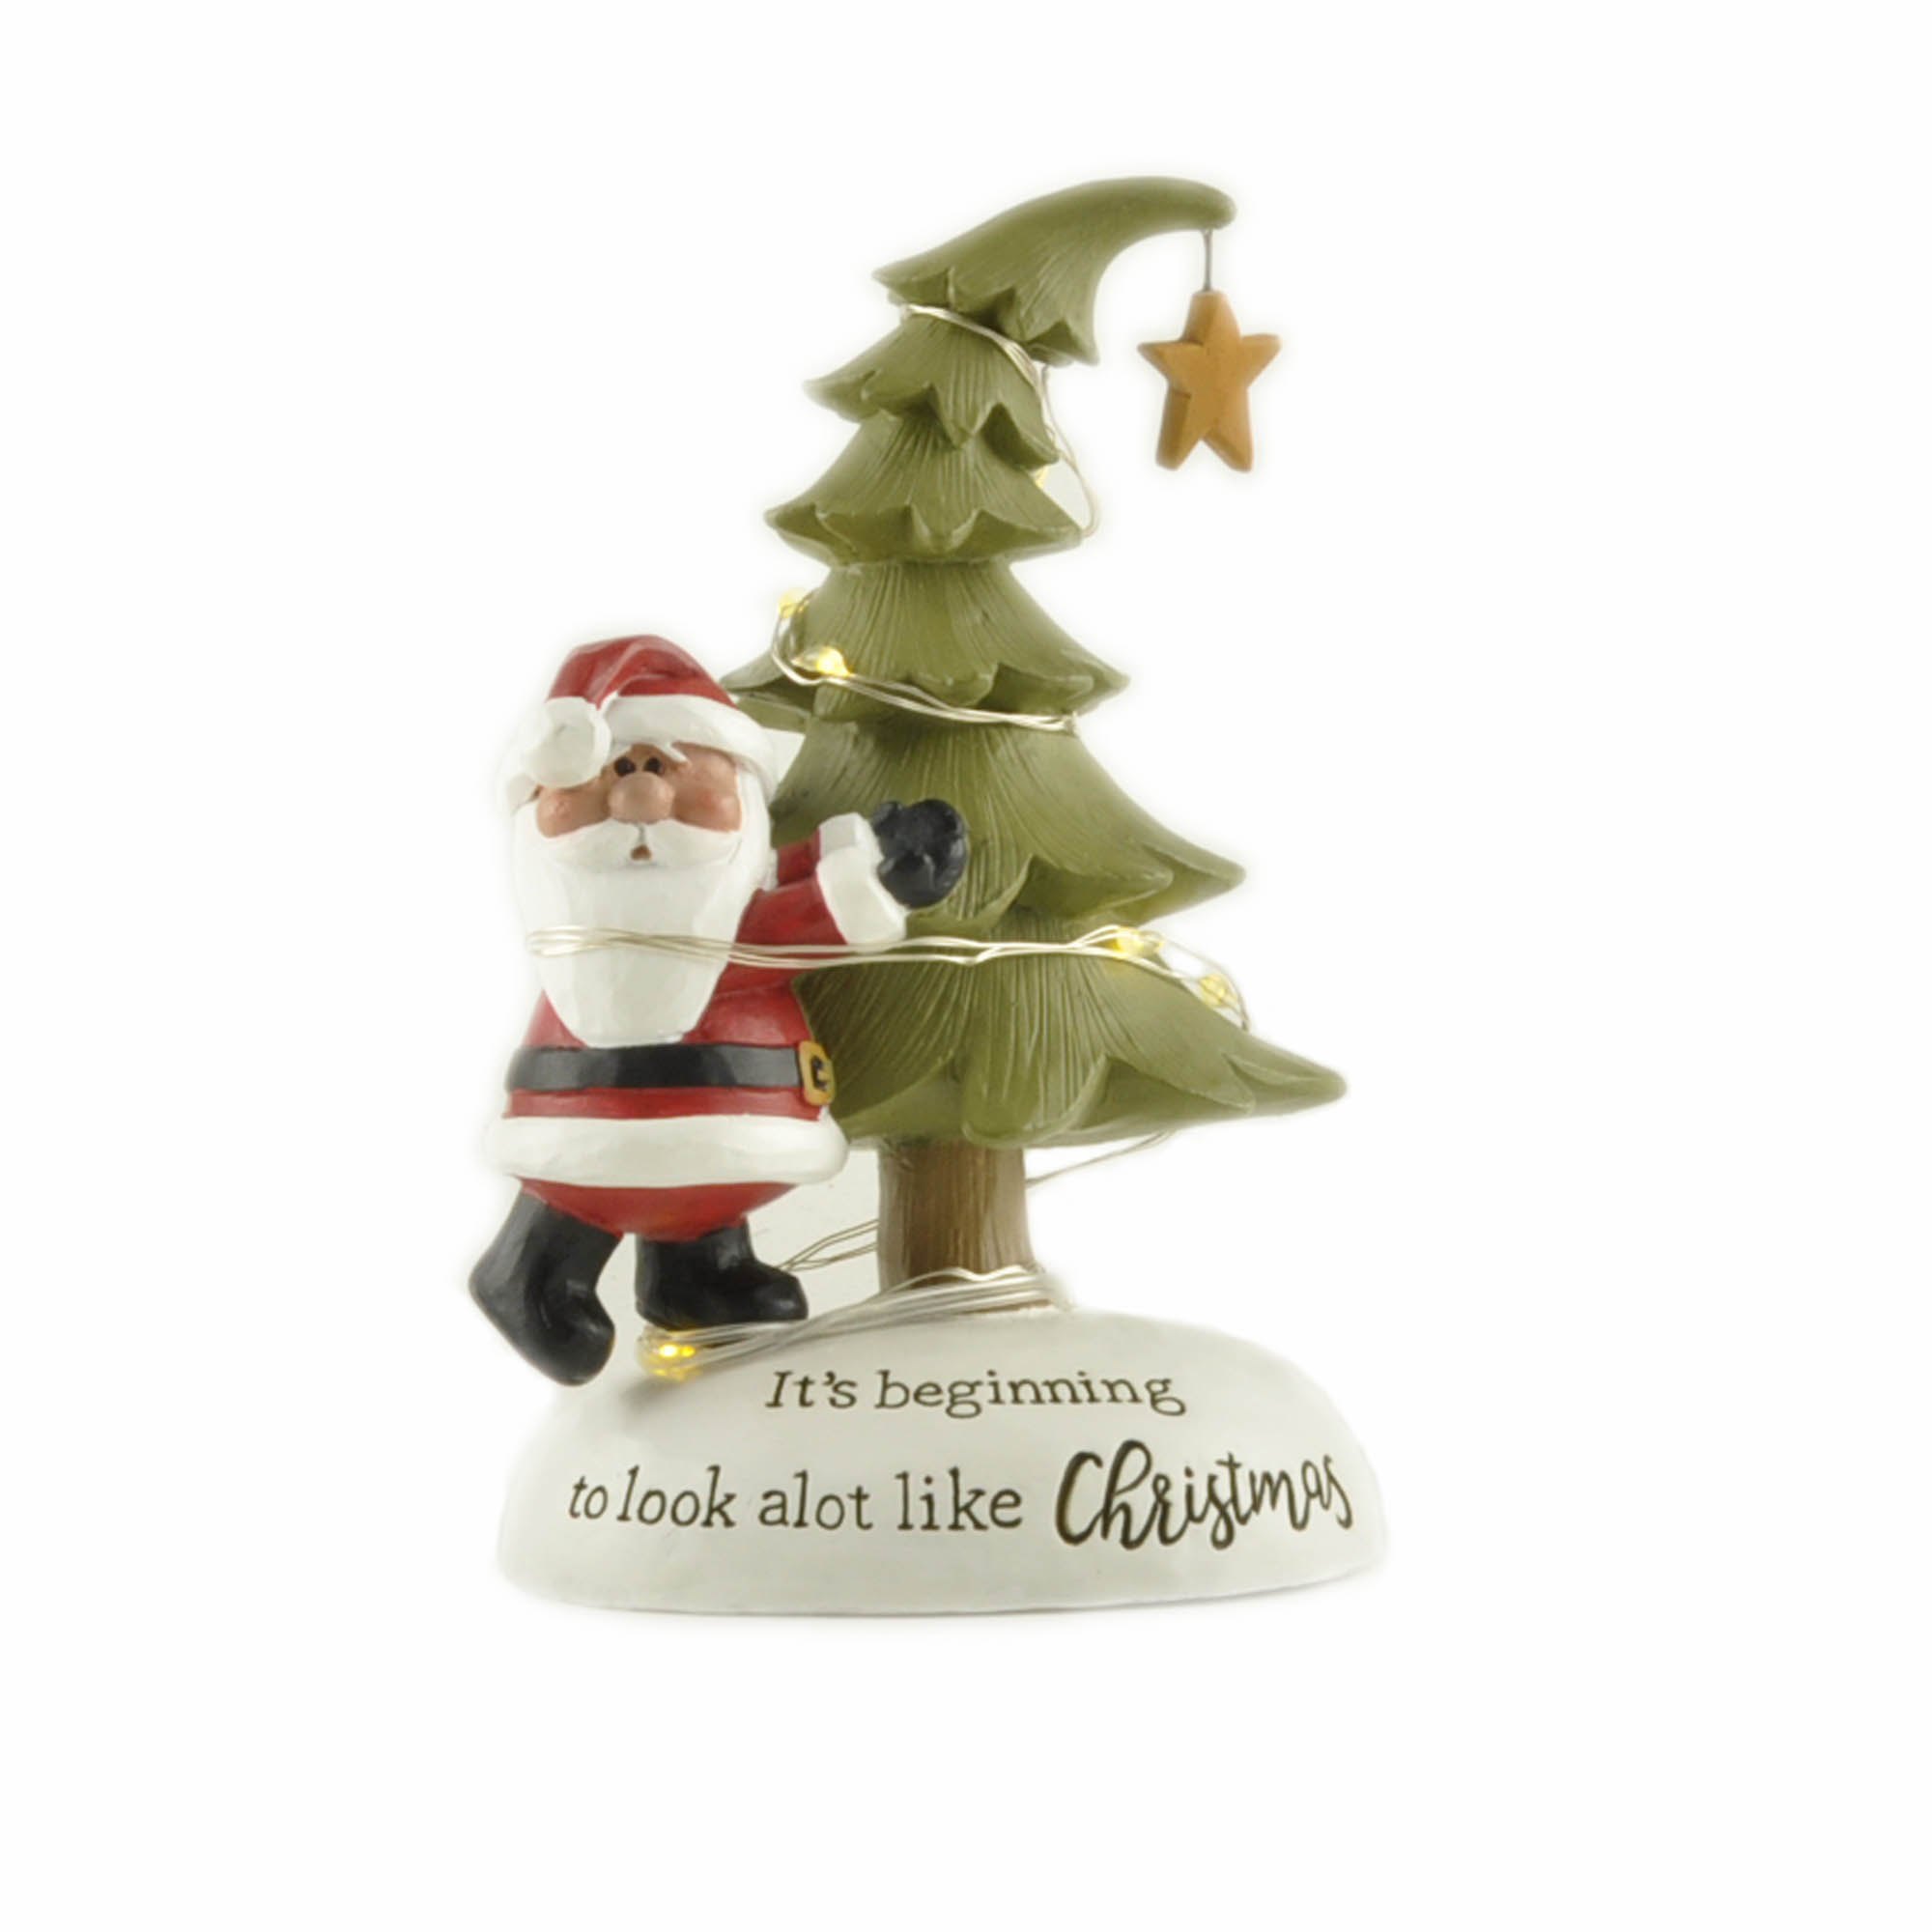 Illuminated Resin Santa and Christmas Tree Figurine with LED Lights – 'It's Beginning to Look a Lot Like Christmas' for Holiday Decor 238-13909